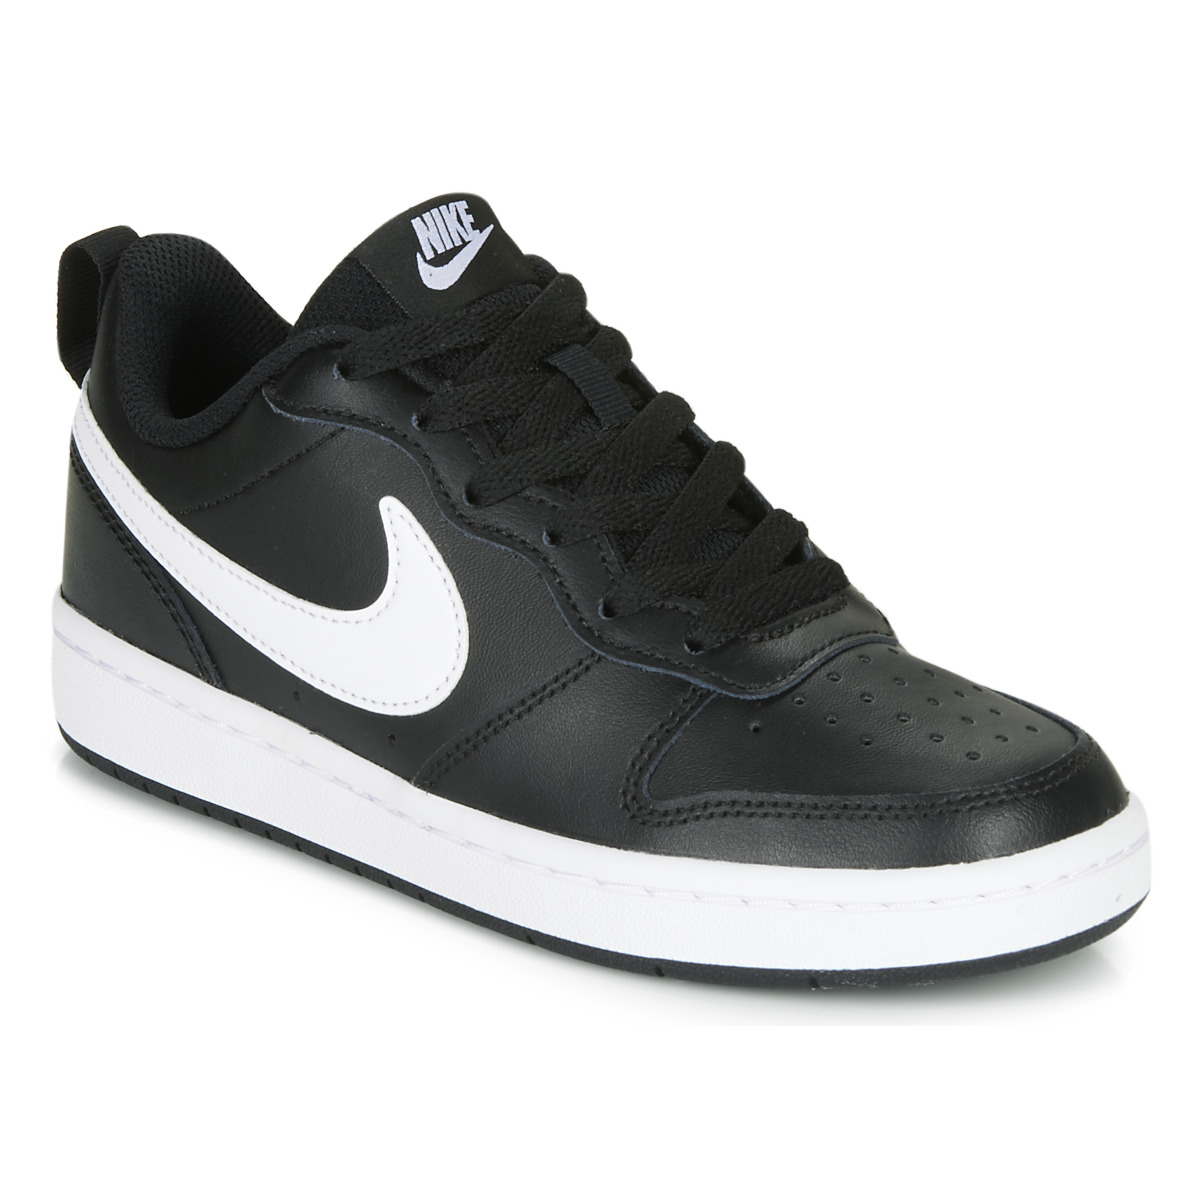 Nike Court Borough Low 2 Gs Black White Free Delivery Spartoo Net Shoes Low Top Trainers Child Usd 54 00